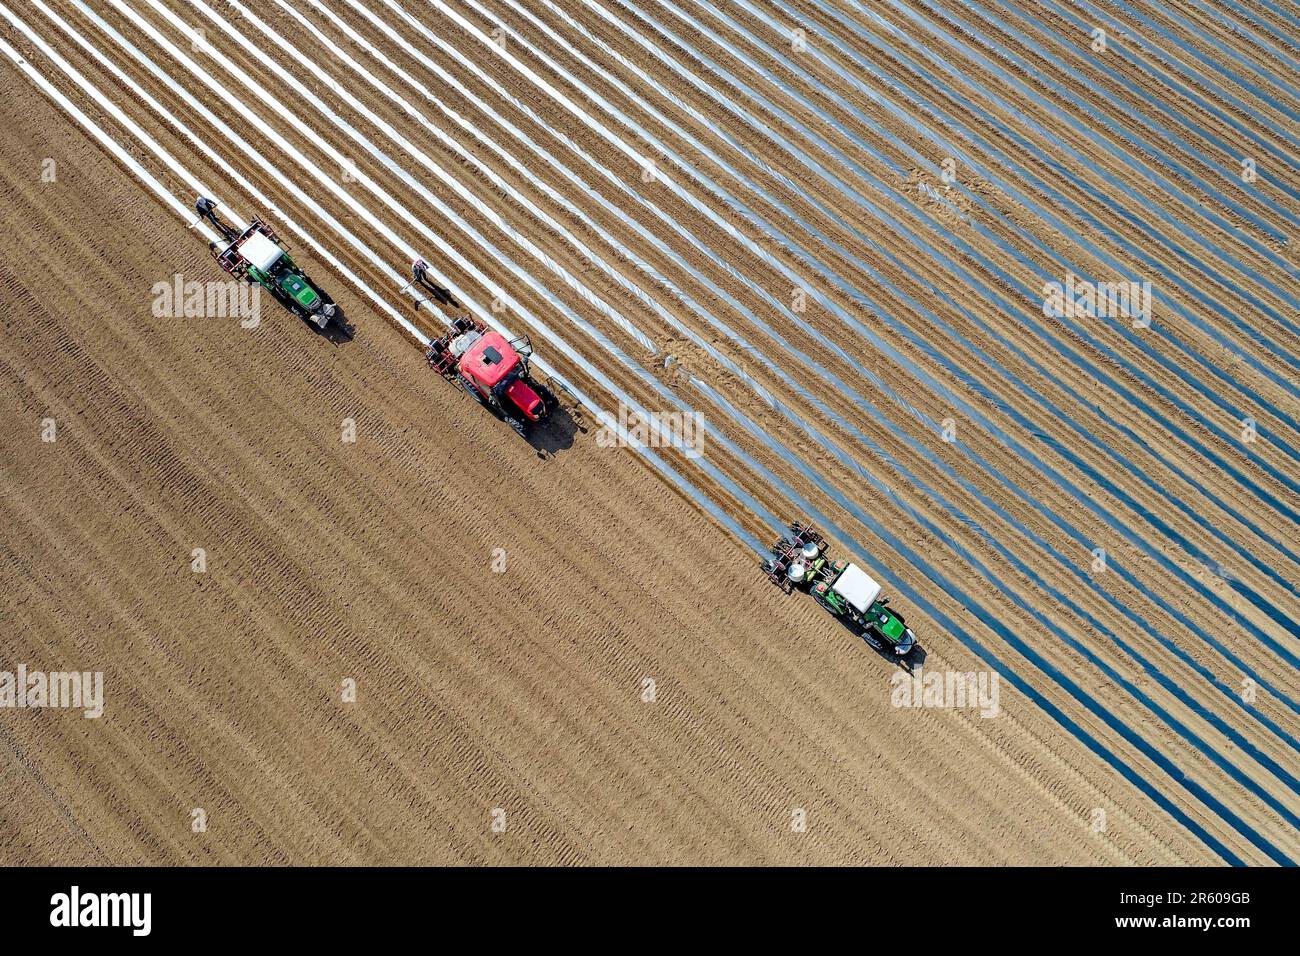 ORDOS, CHINA - JUNE 6, 2023 - An aerial photo shows  farm machines working in a pepper field in Ordos, Inner Mongolia, China, June 6, 2023. Stock Photo